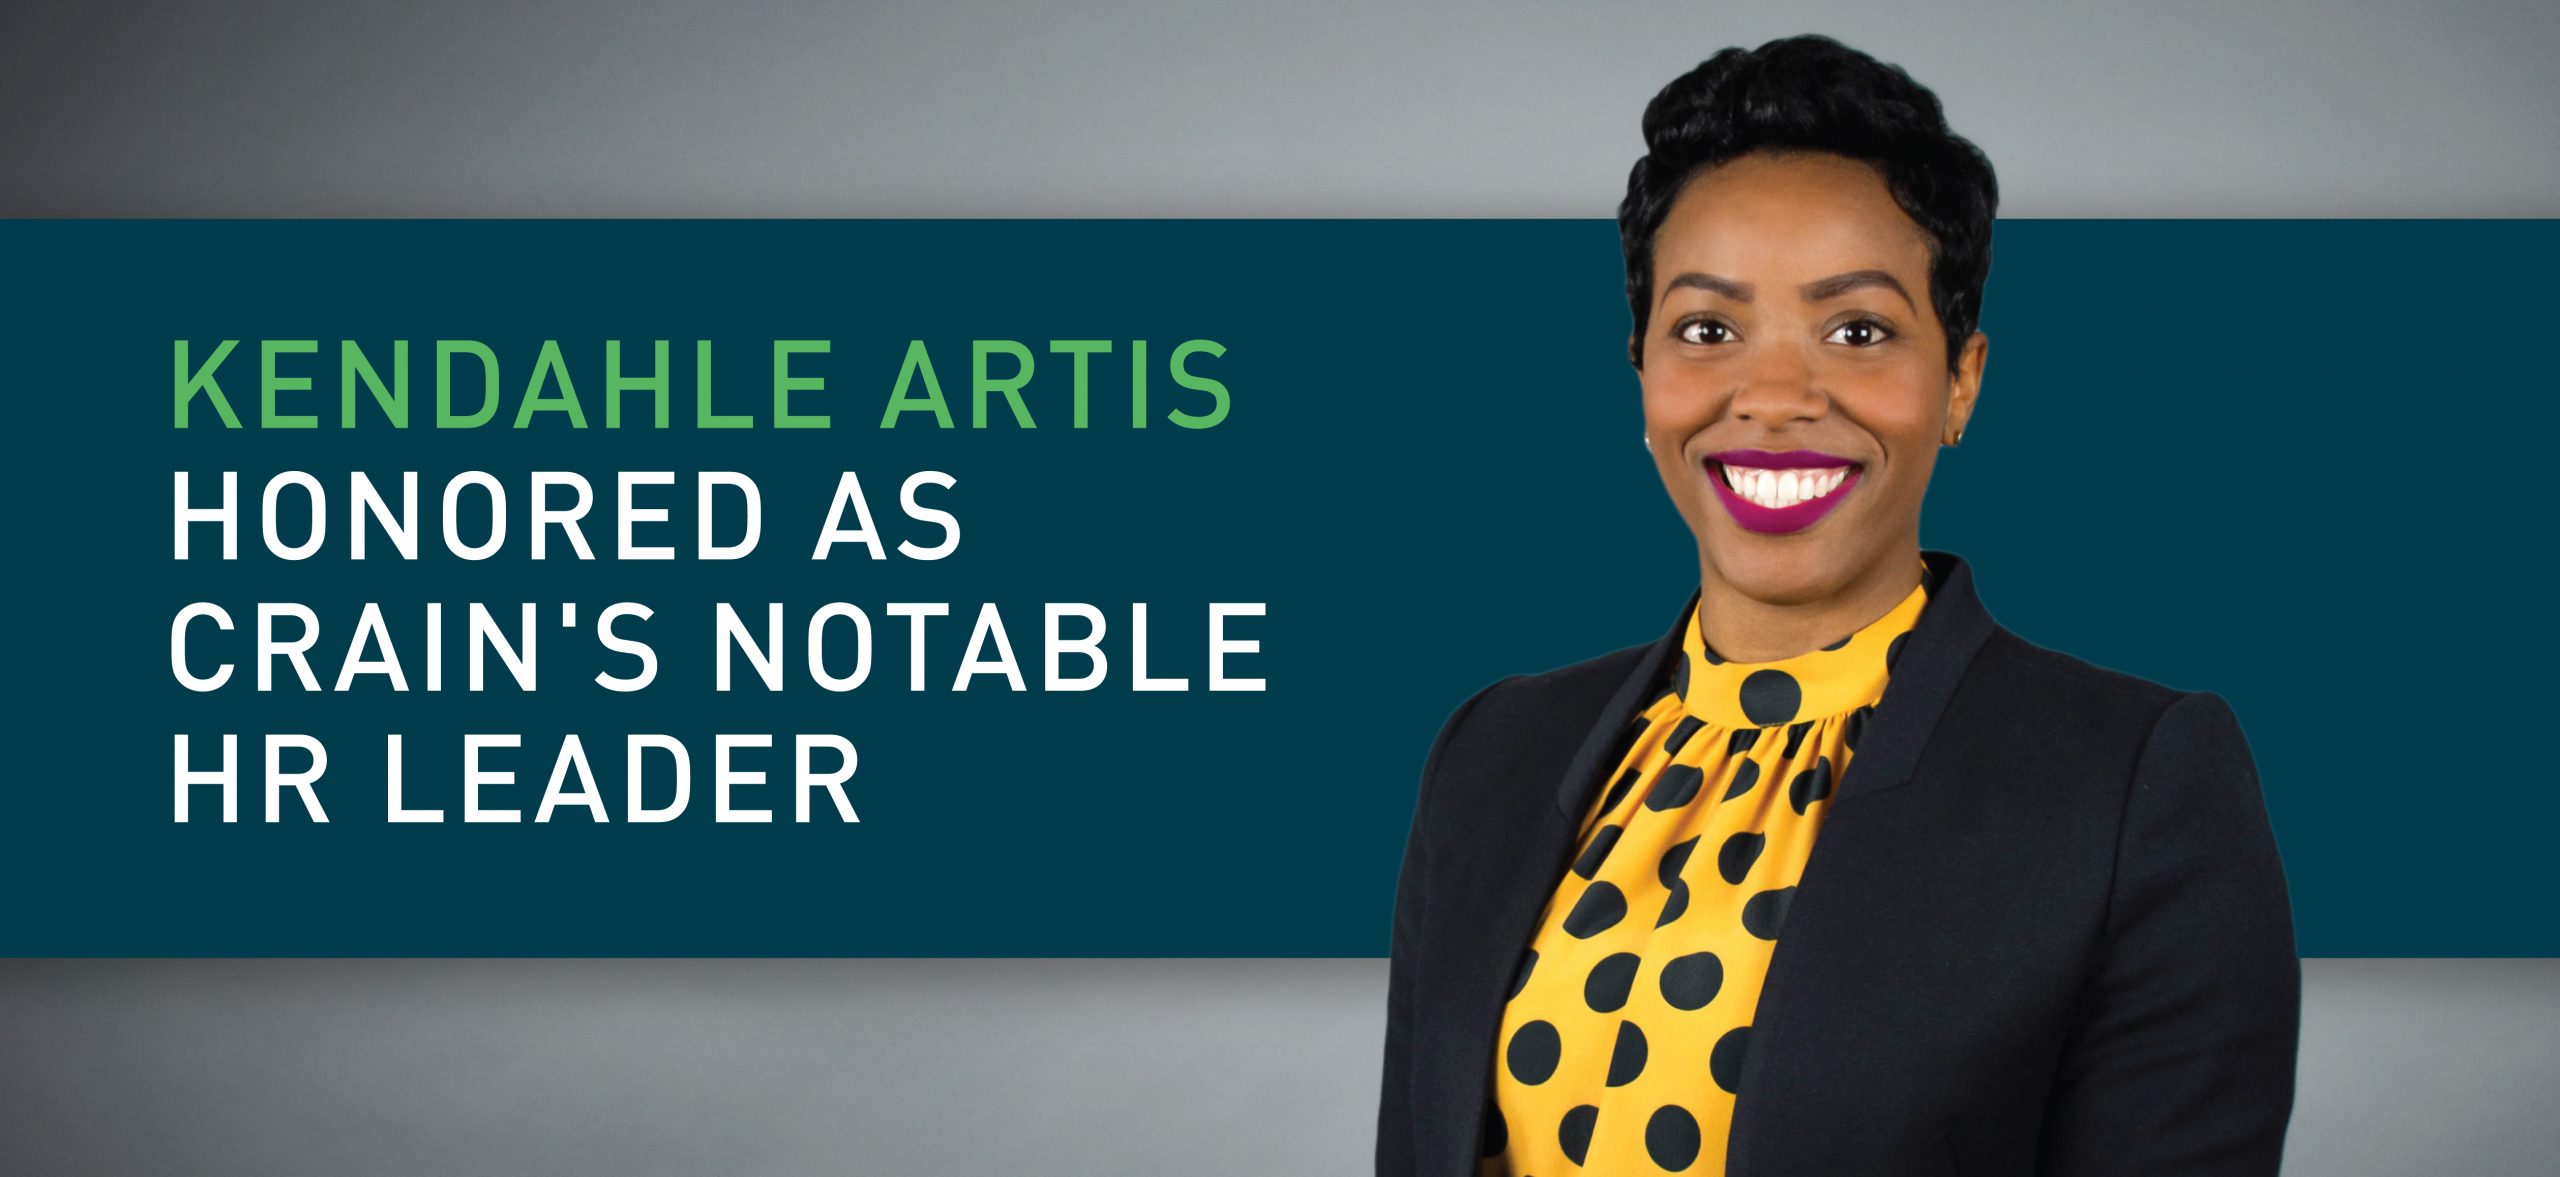 Director of Human Resources, Kendahle Artis, Recognized in Crain’s 2021 Notable Leaders in HR